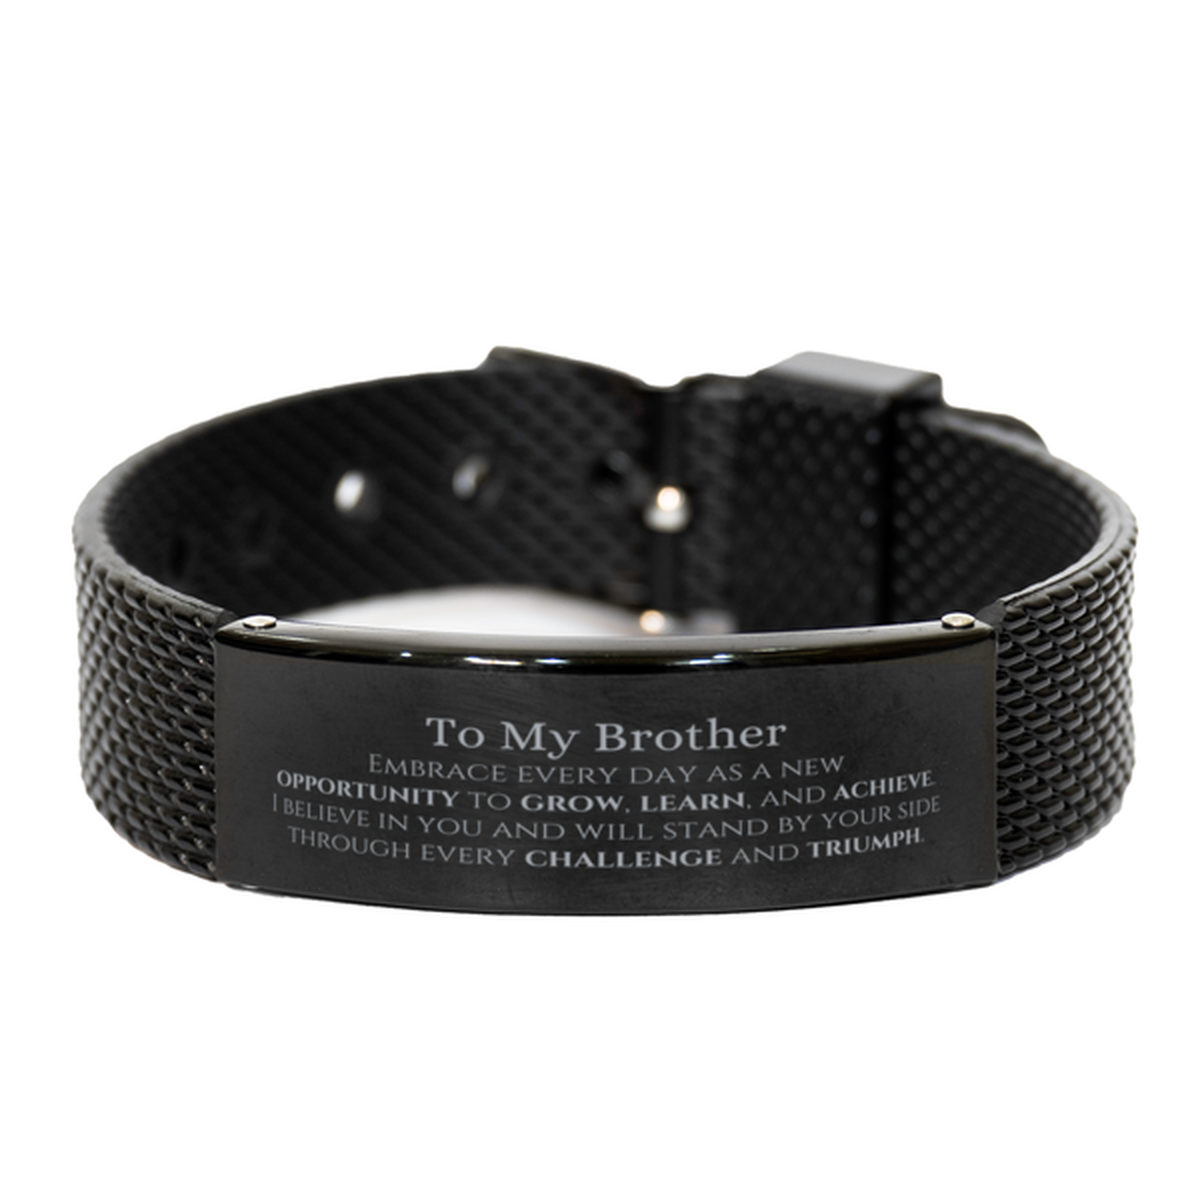 To My Brother Gifts, I believe in you and will stand by your side, Inspirational Black Shark Mesh Bracelet For Brother, Birthday Christmas Motivational Brother Gifts